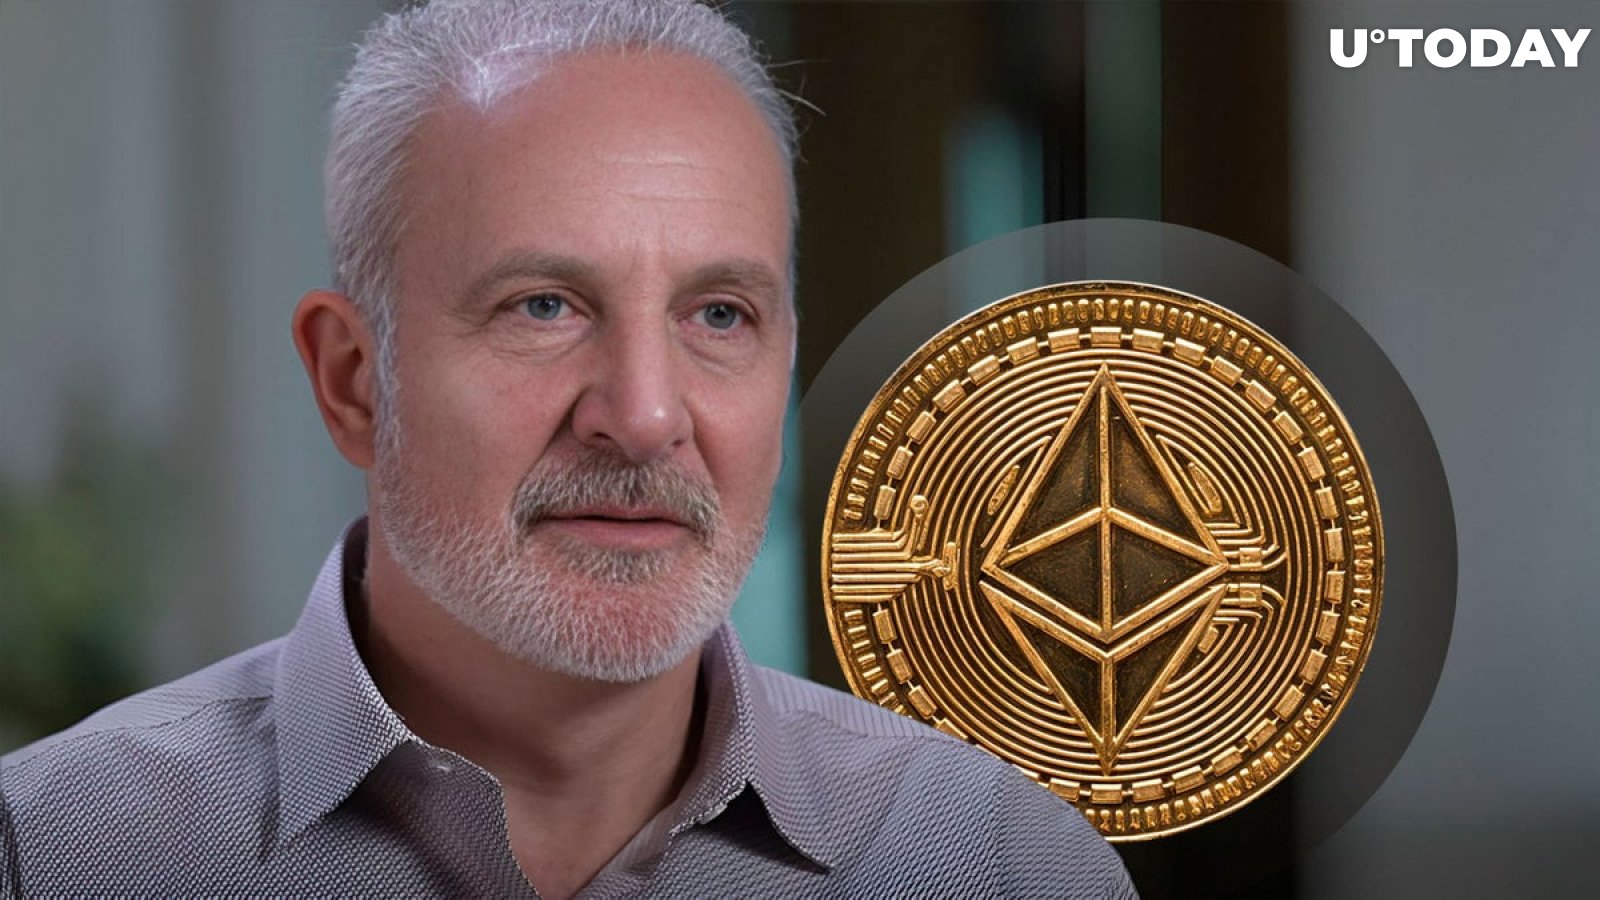 Peter Schiff Claims Bitcoin Can “Easily” Collapse to $3K if This Happens